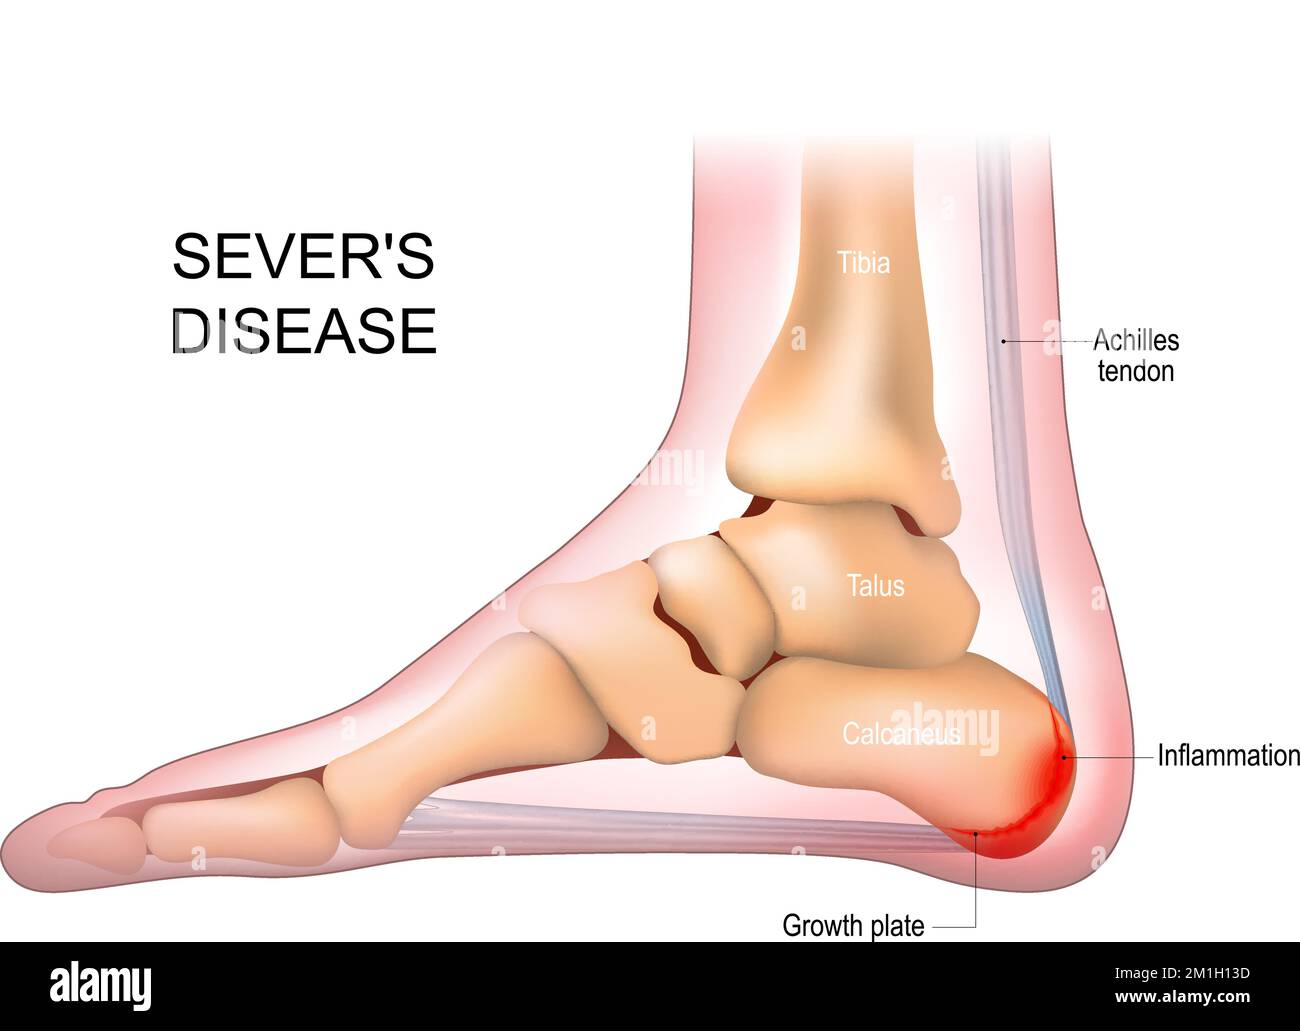 Severs disease. calcaneus apophysitis. inflammation at the back of the heel growth plate. Foot anatomy. side view of a Human foot Stock Vector